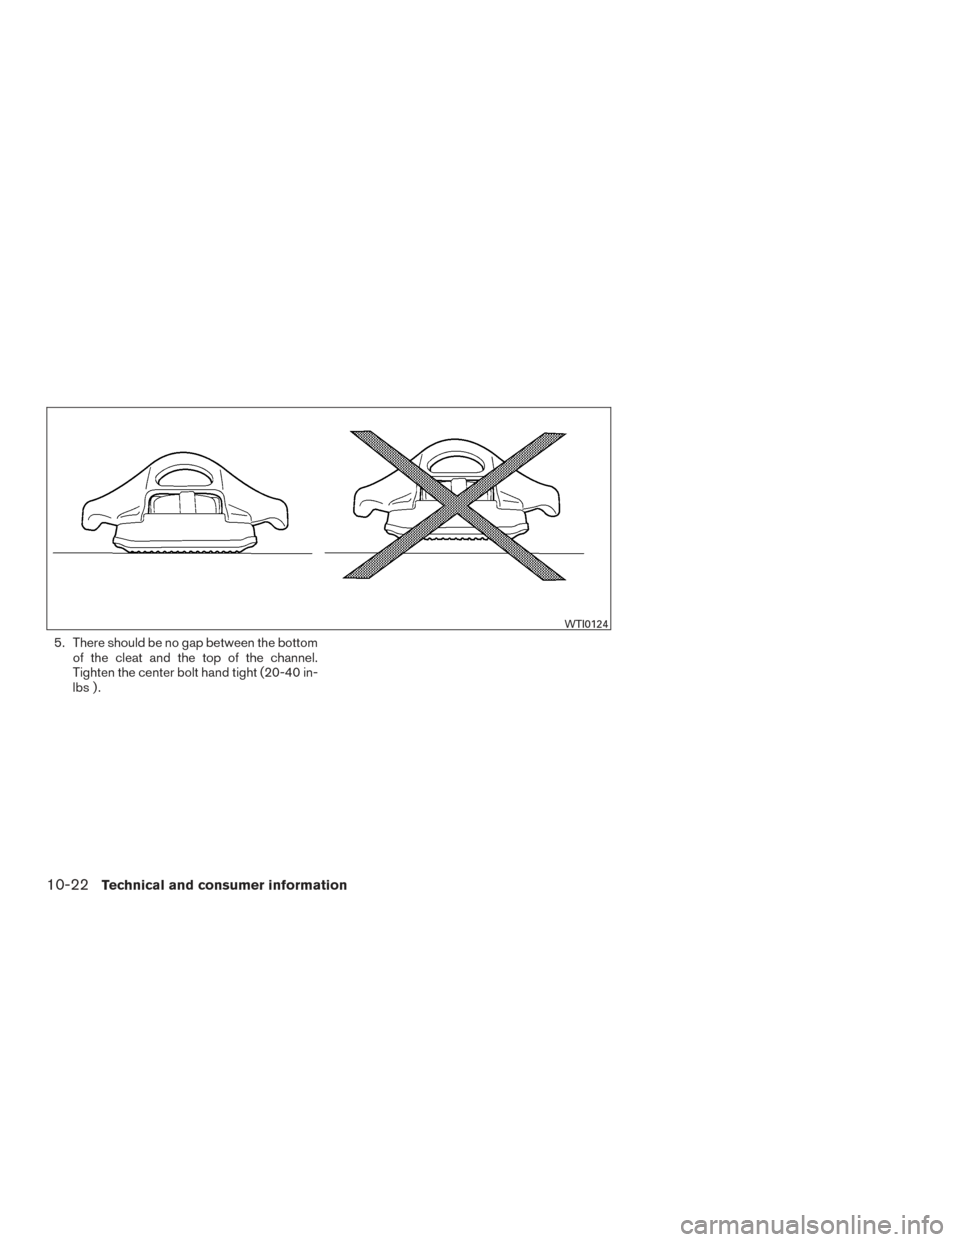 NISSAN FRONTIER 2017 D23 / 3.G Owners Manual 5. There should be no gap between the bottomof the cleat and the top of the channel.
Tighten the center bolt hand tight (20-40 in-
lbs ) .
WTI0124
10-22Technical and consumer information 